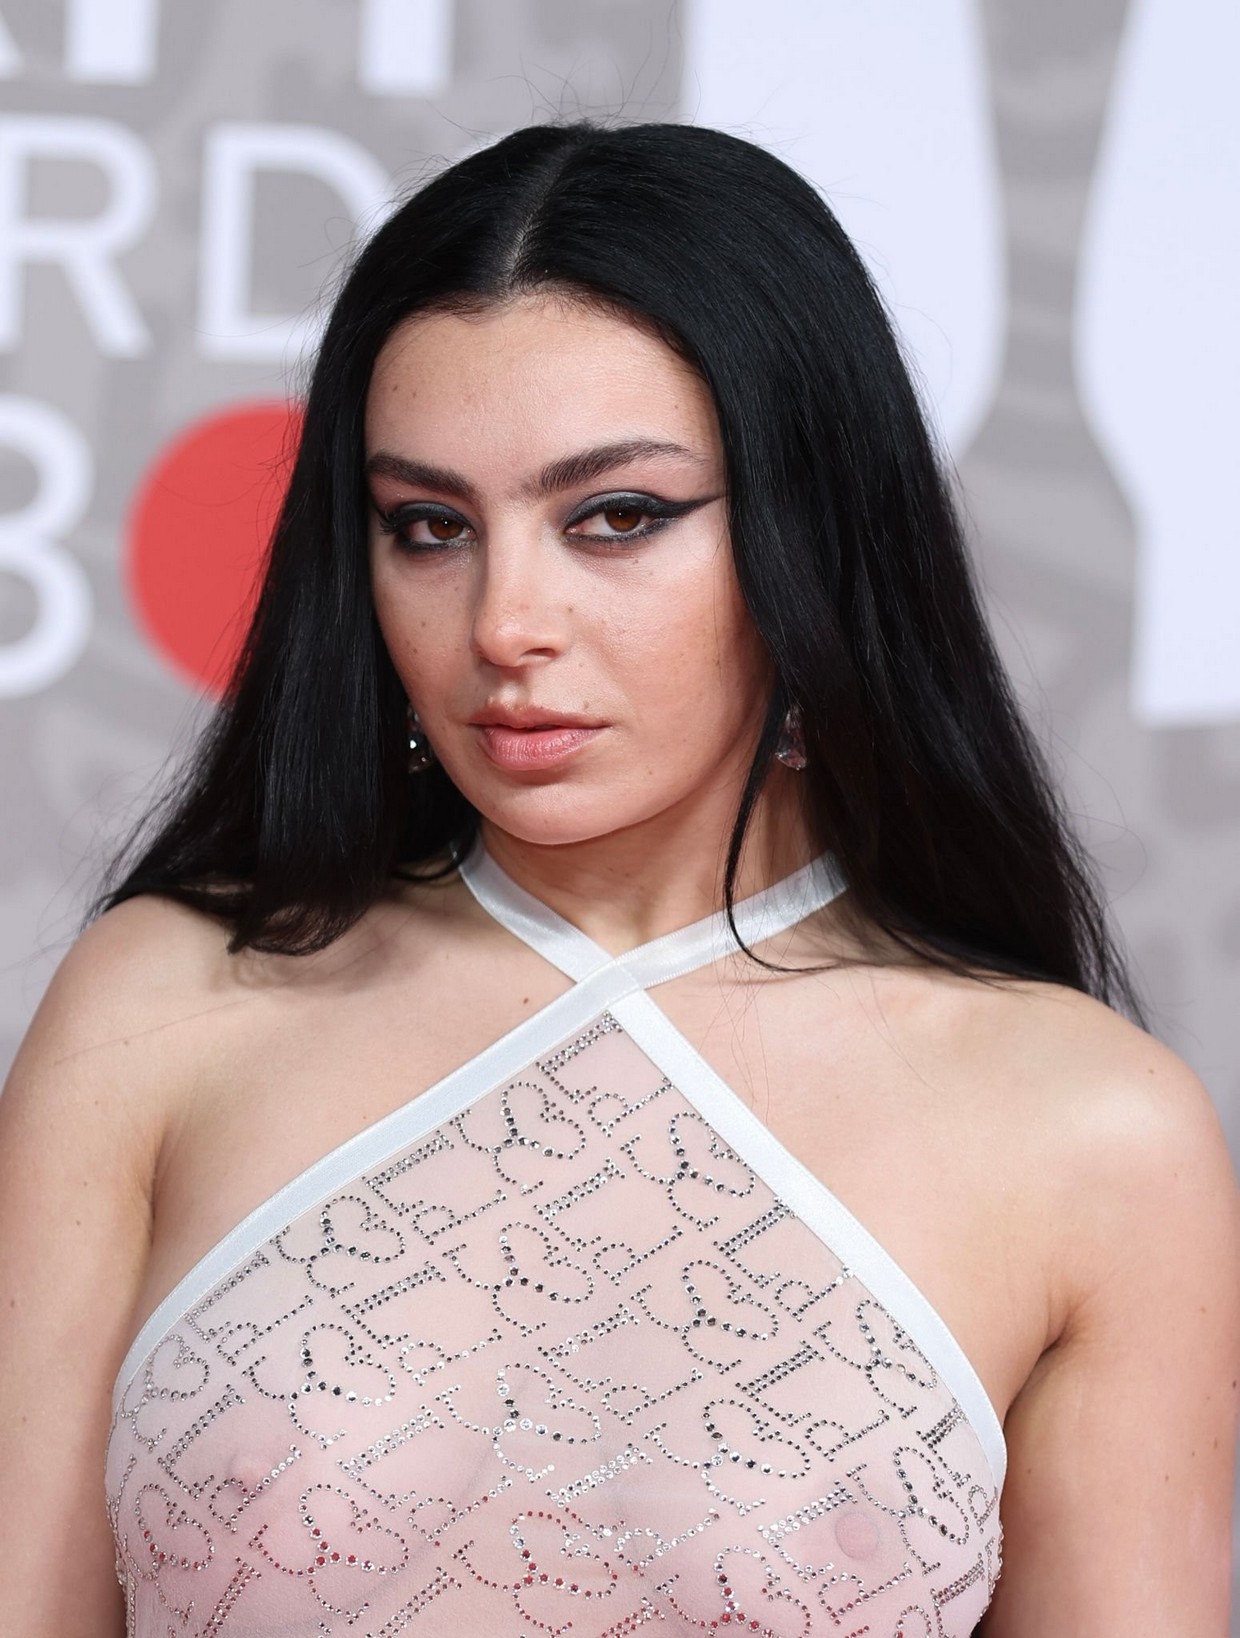 Charli XCX Tits TheFappening.Pro 2 - Charli XCX Exposed Tits In Ses Through Ludovic de Saint Sernin Dress (20 Photos)